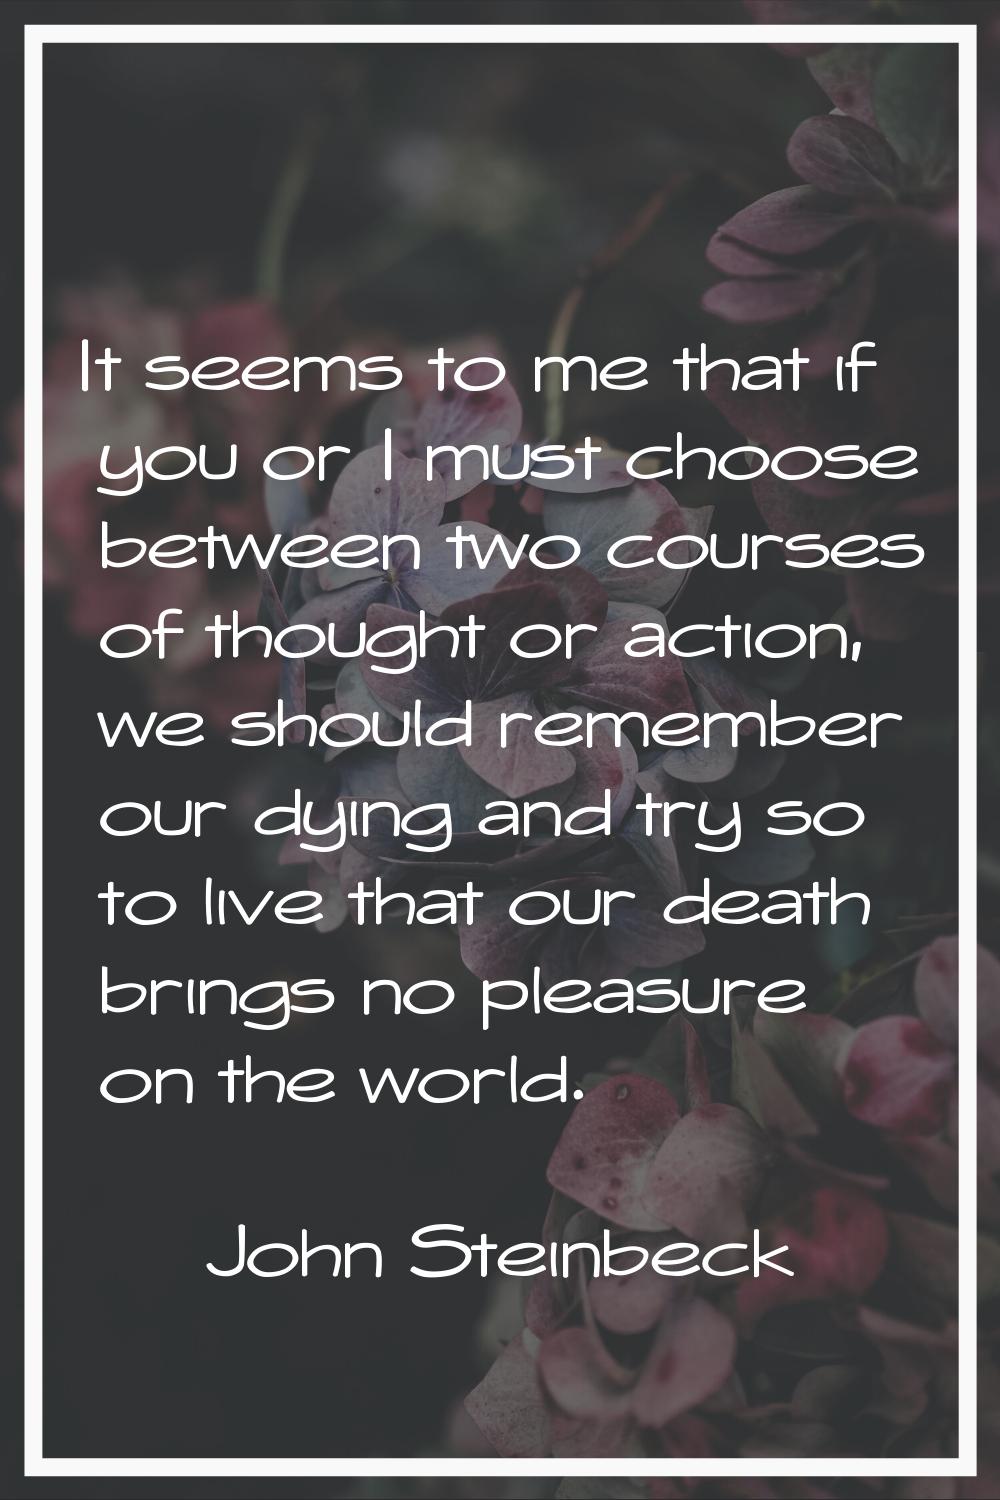 It seems to me that if you or I must choose between two courses of thought or action, we should rem